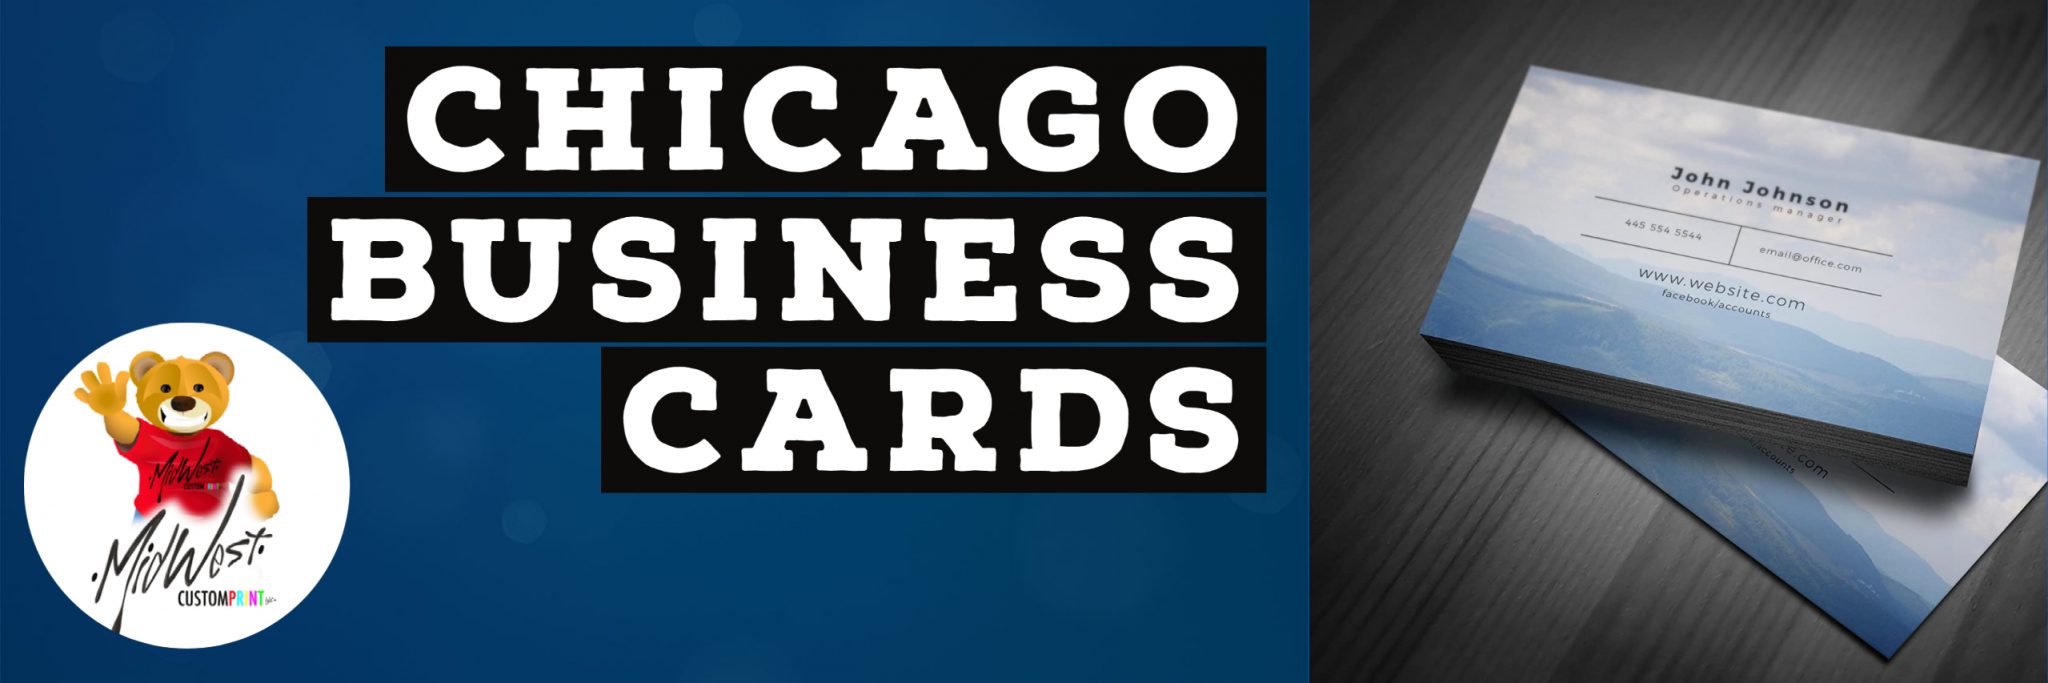 print business cards chicago 1